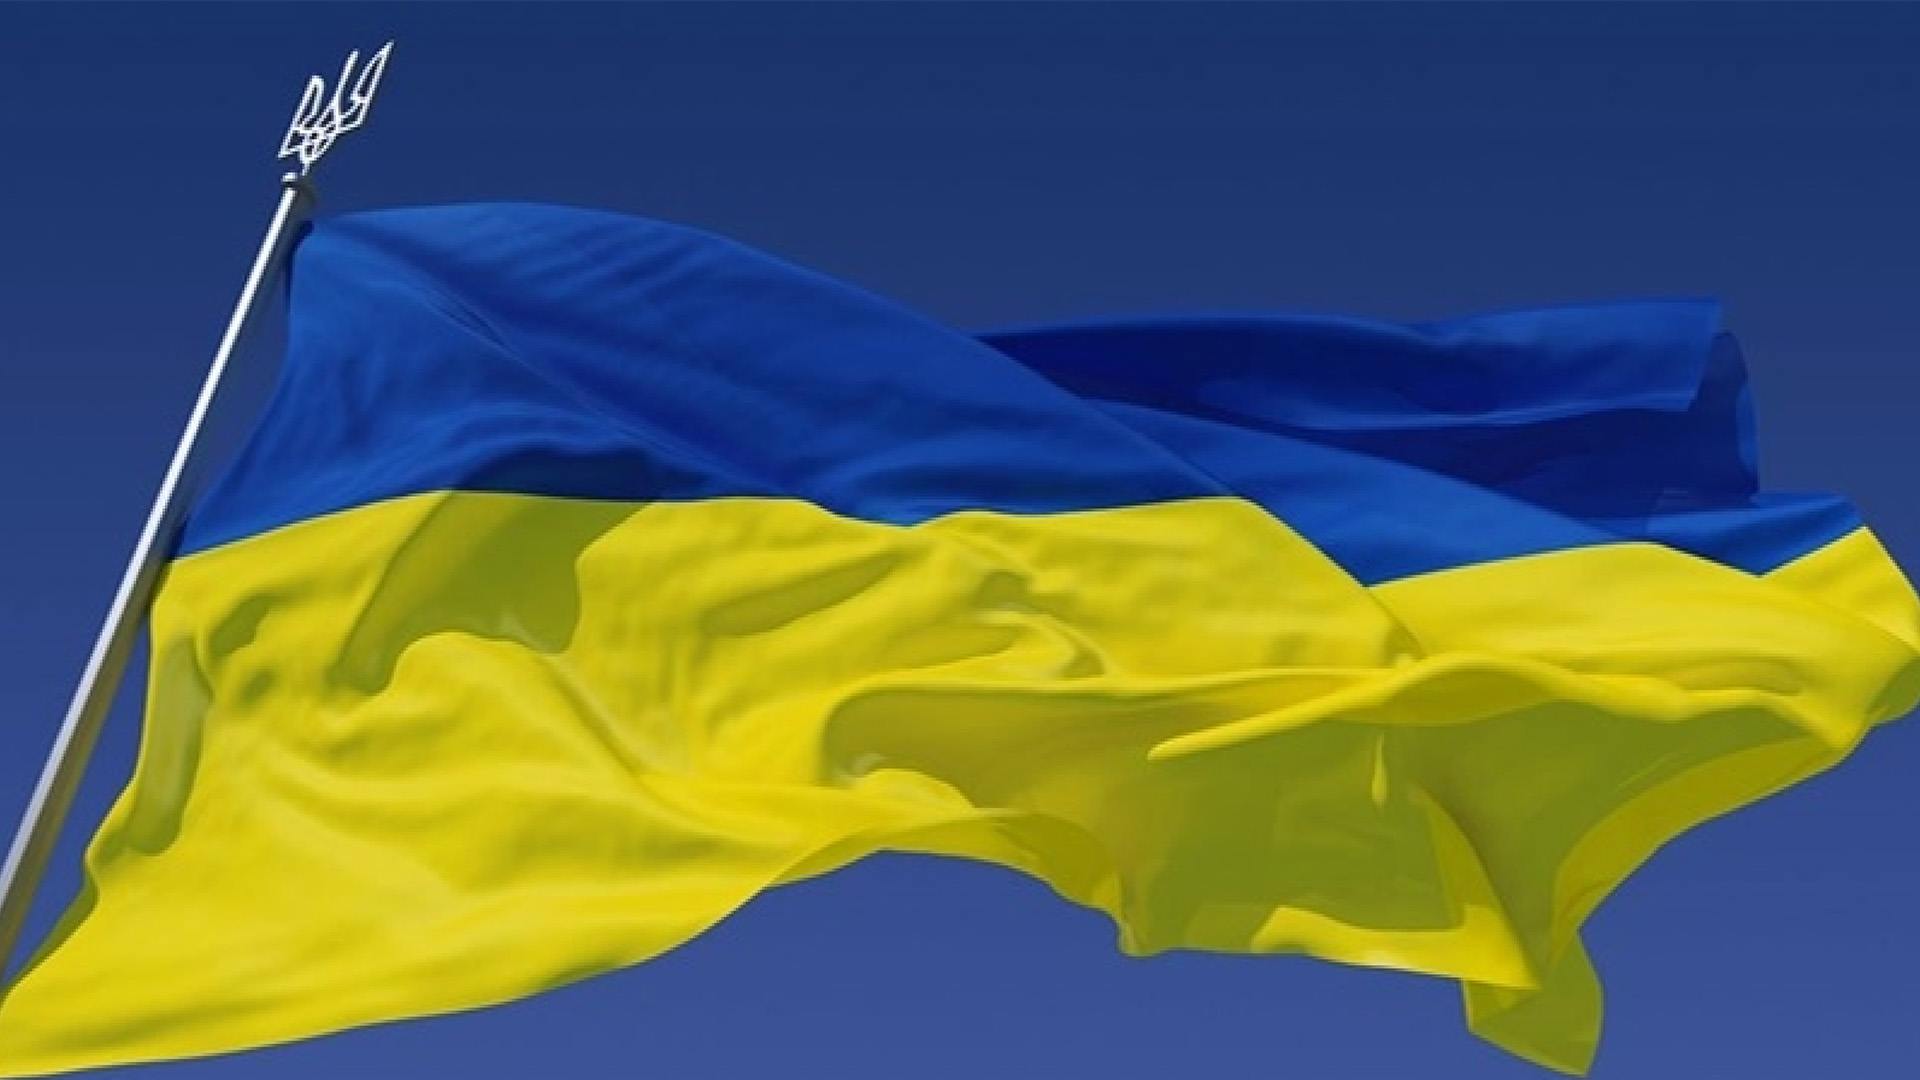 AutoPolitic and QSearch to provide Ukraine Government with free Social Media intelligence